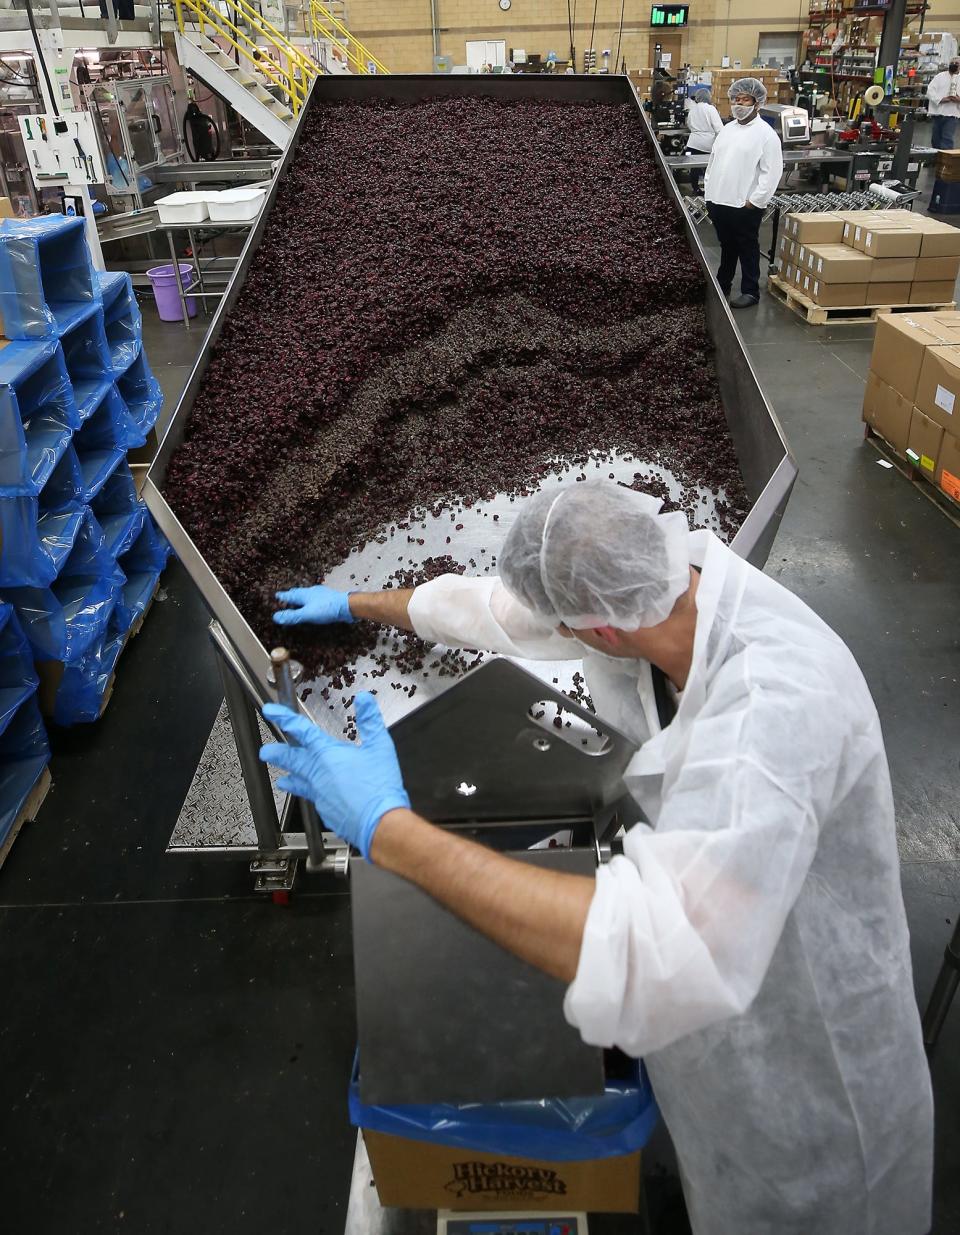 A worker scoops cranberry dark chocolate mix at Hickory Harvest, Tuesday, June 14, 2022, in Coventry Township, Ohio.